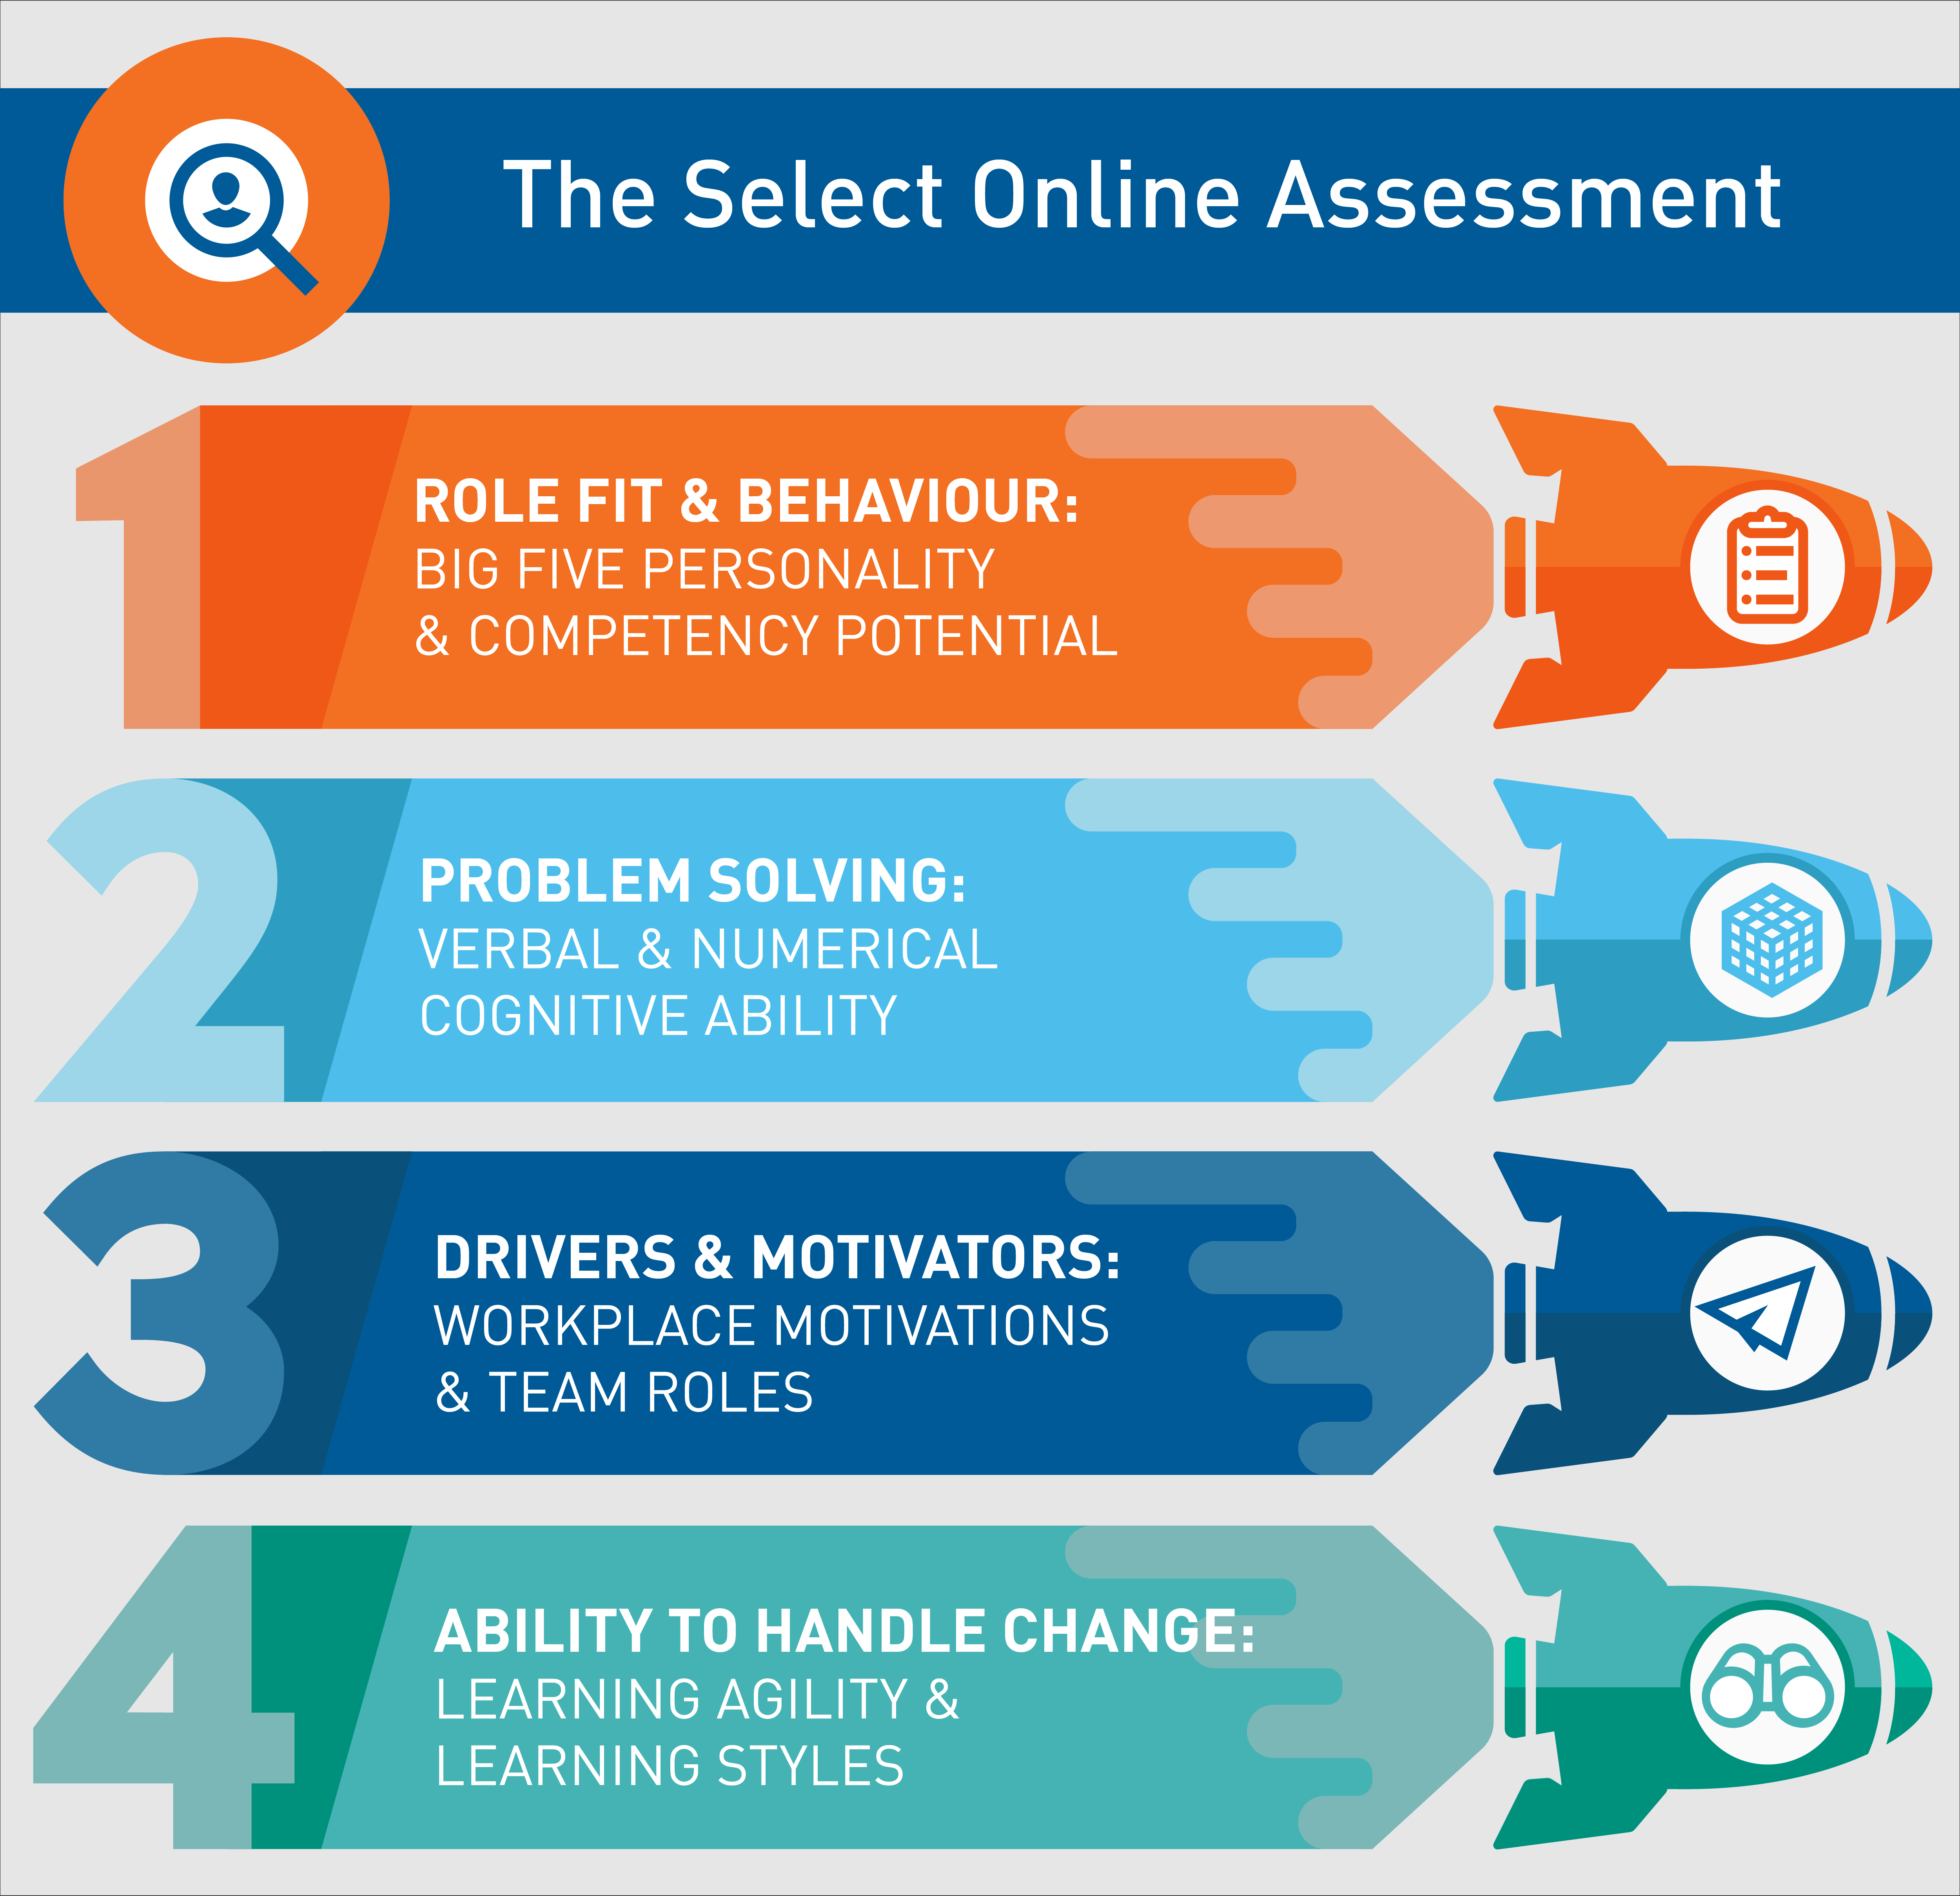 Areas measured by the Select online selection assessment